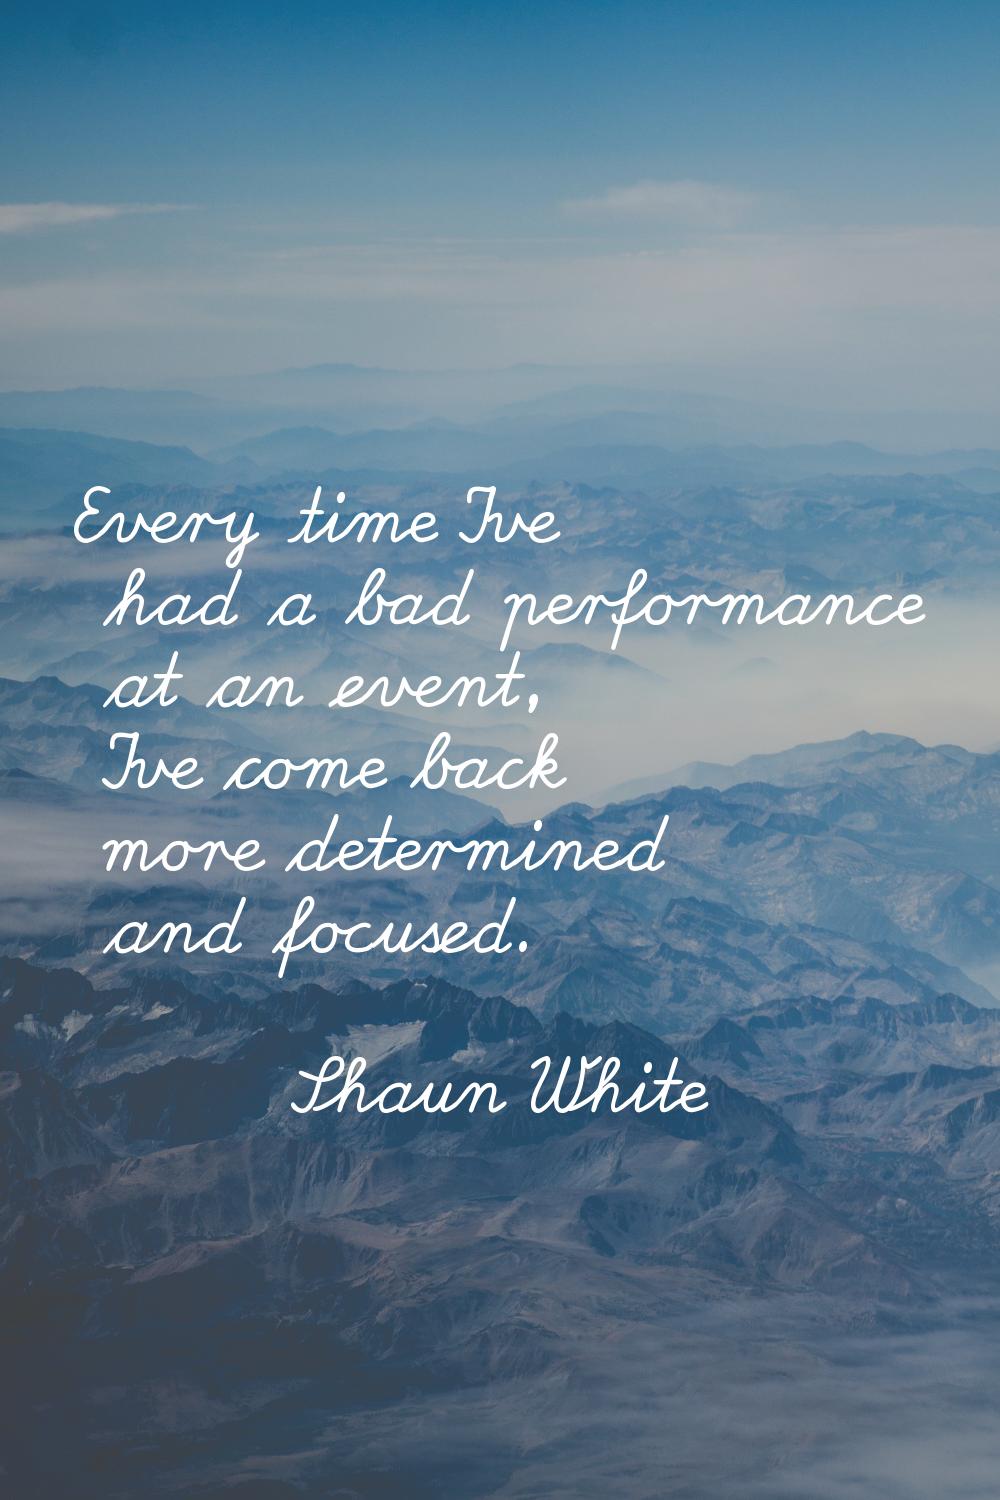 Every time I've had a bad performance at an event, I've come back more determined and focused.